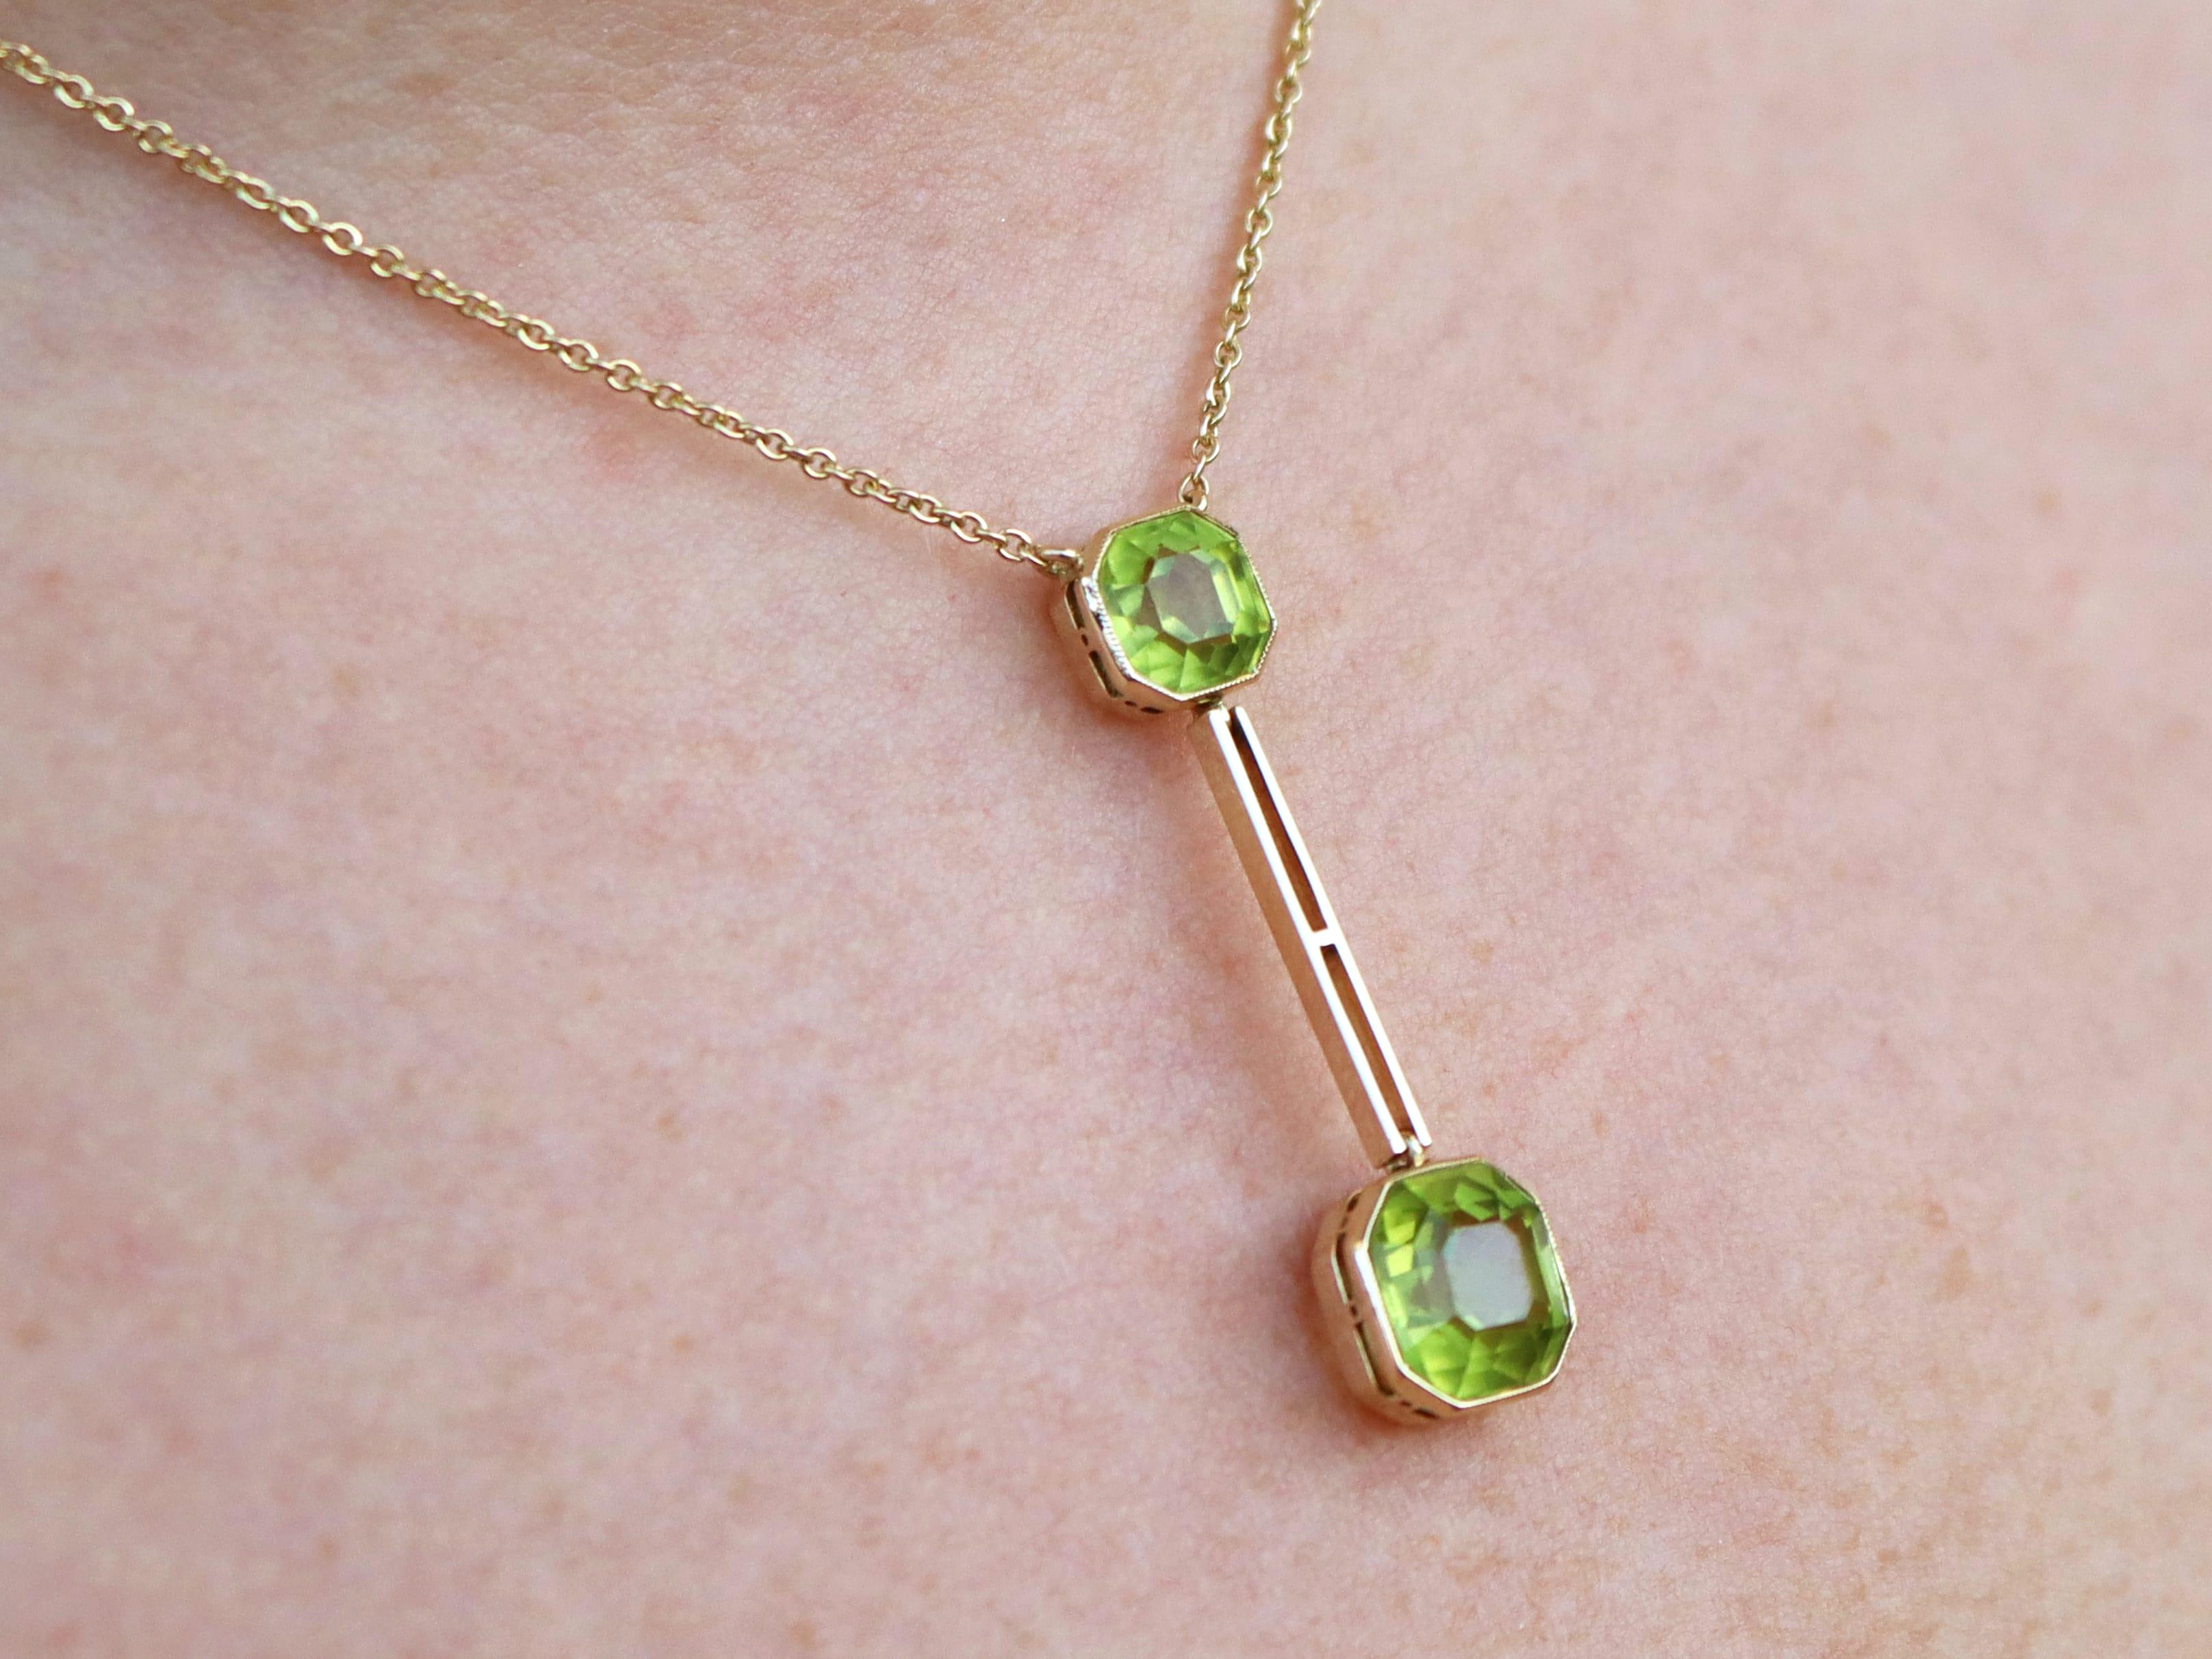 Antique 5.97 Carat Peridot and Yellow Gold Pendant For Sale 3